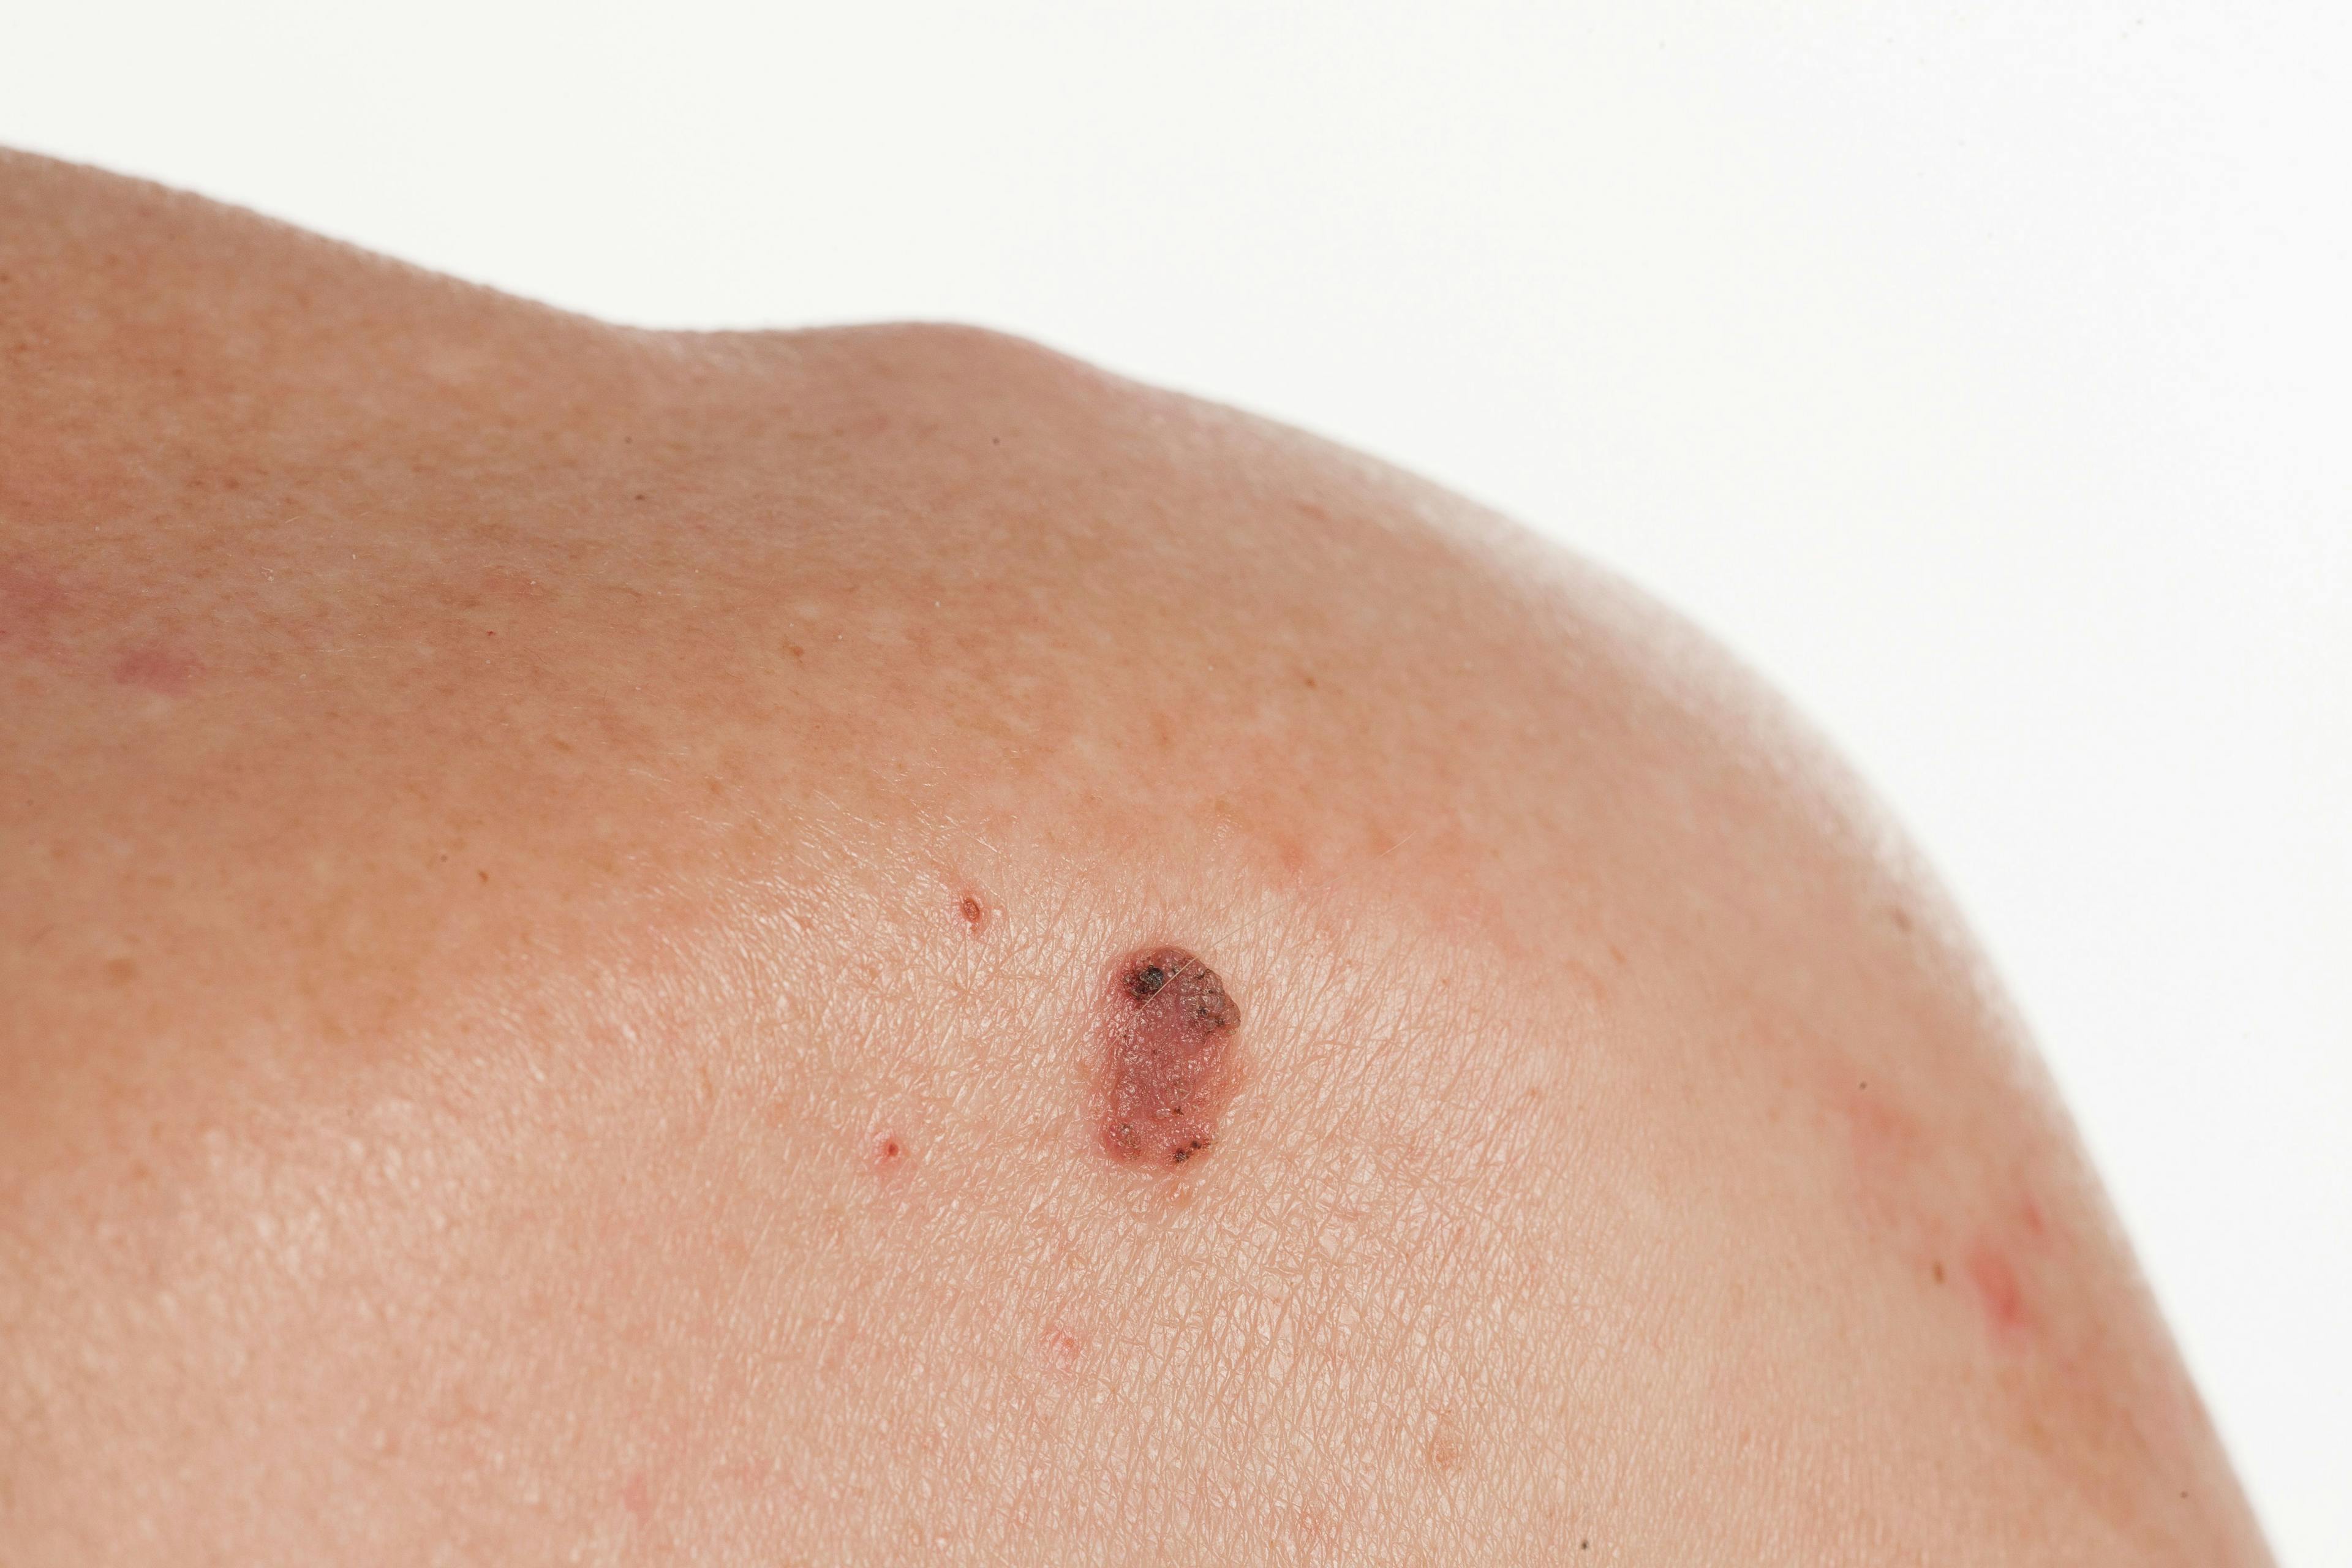 Nonsurgical Treatment for Nonmelanoma Skin Cancer Exhibits 99% Cure Rate